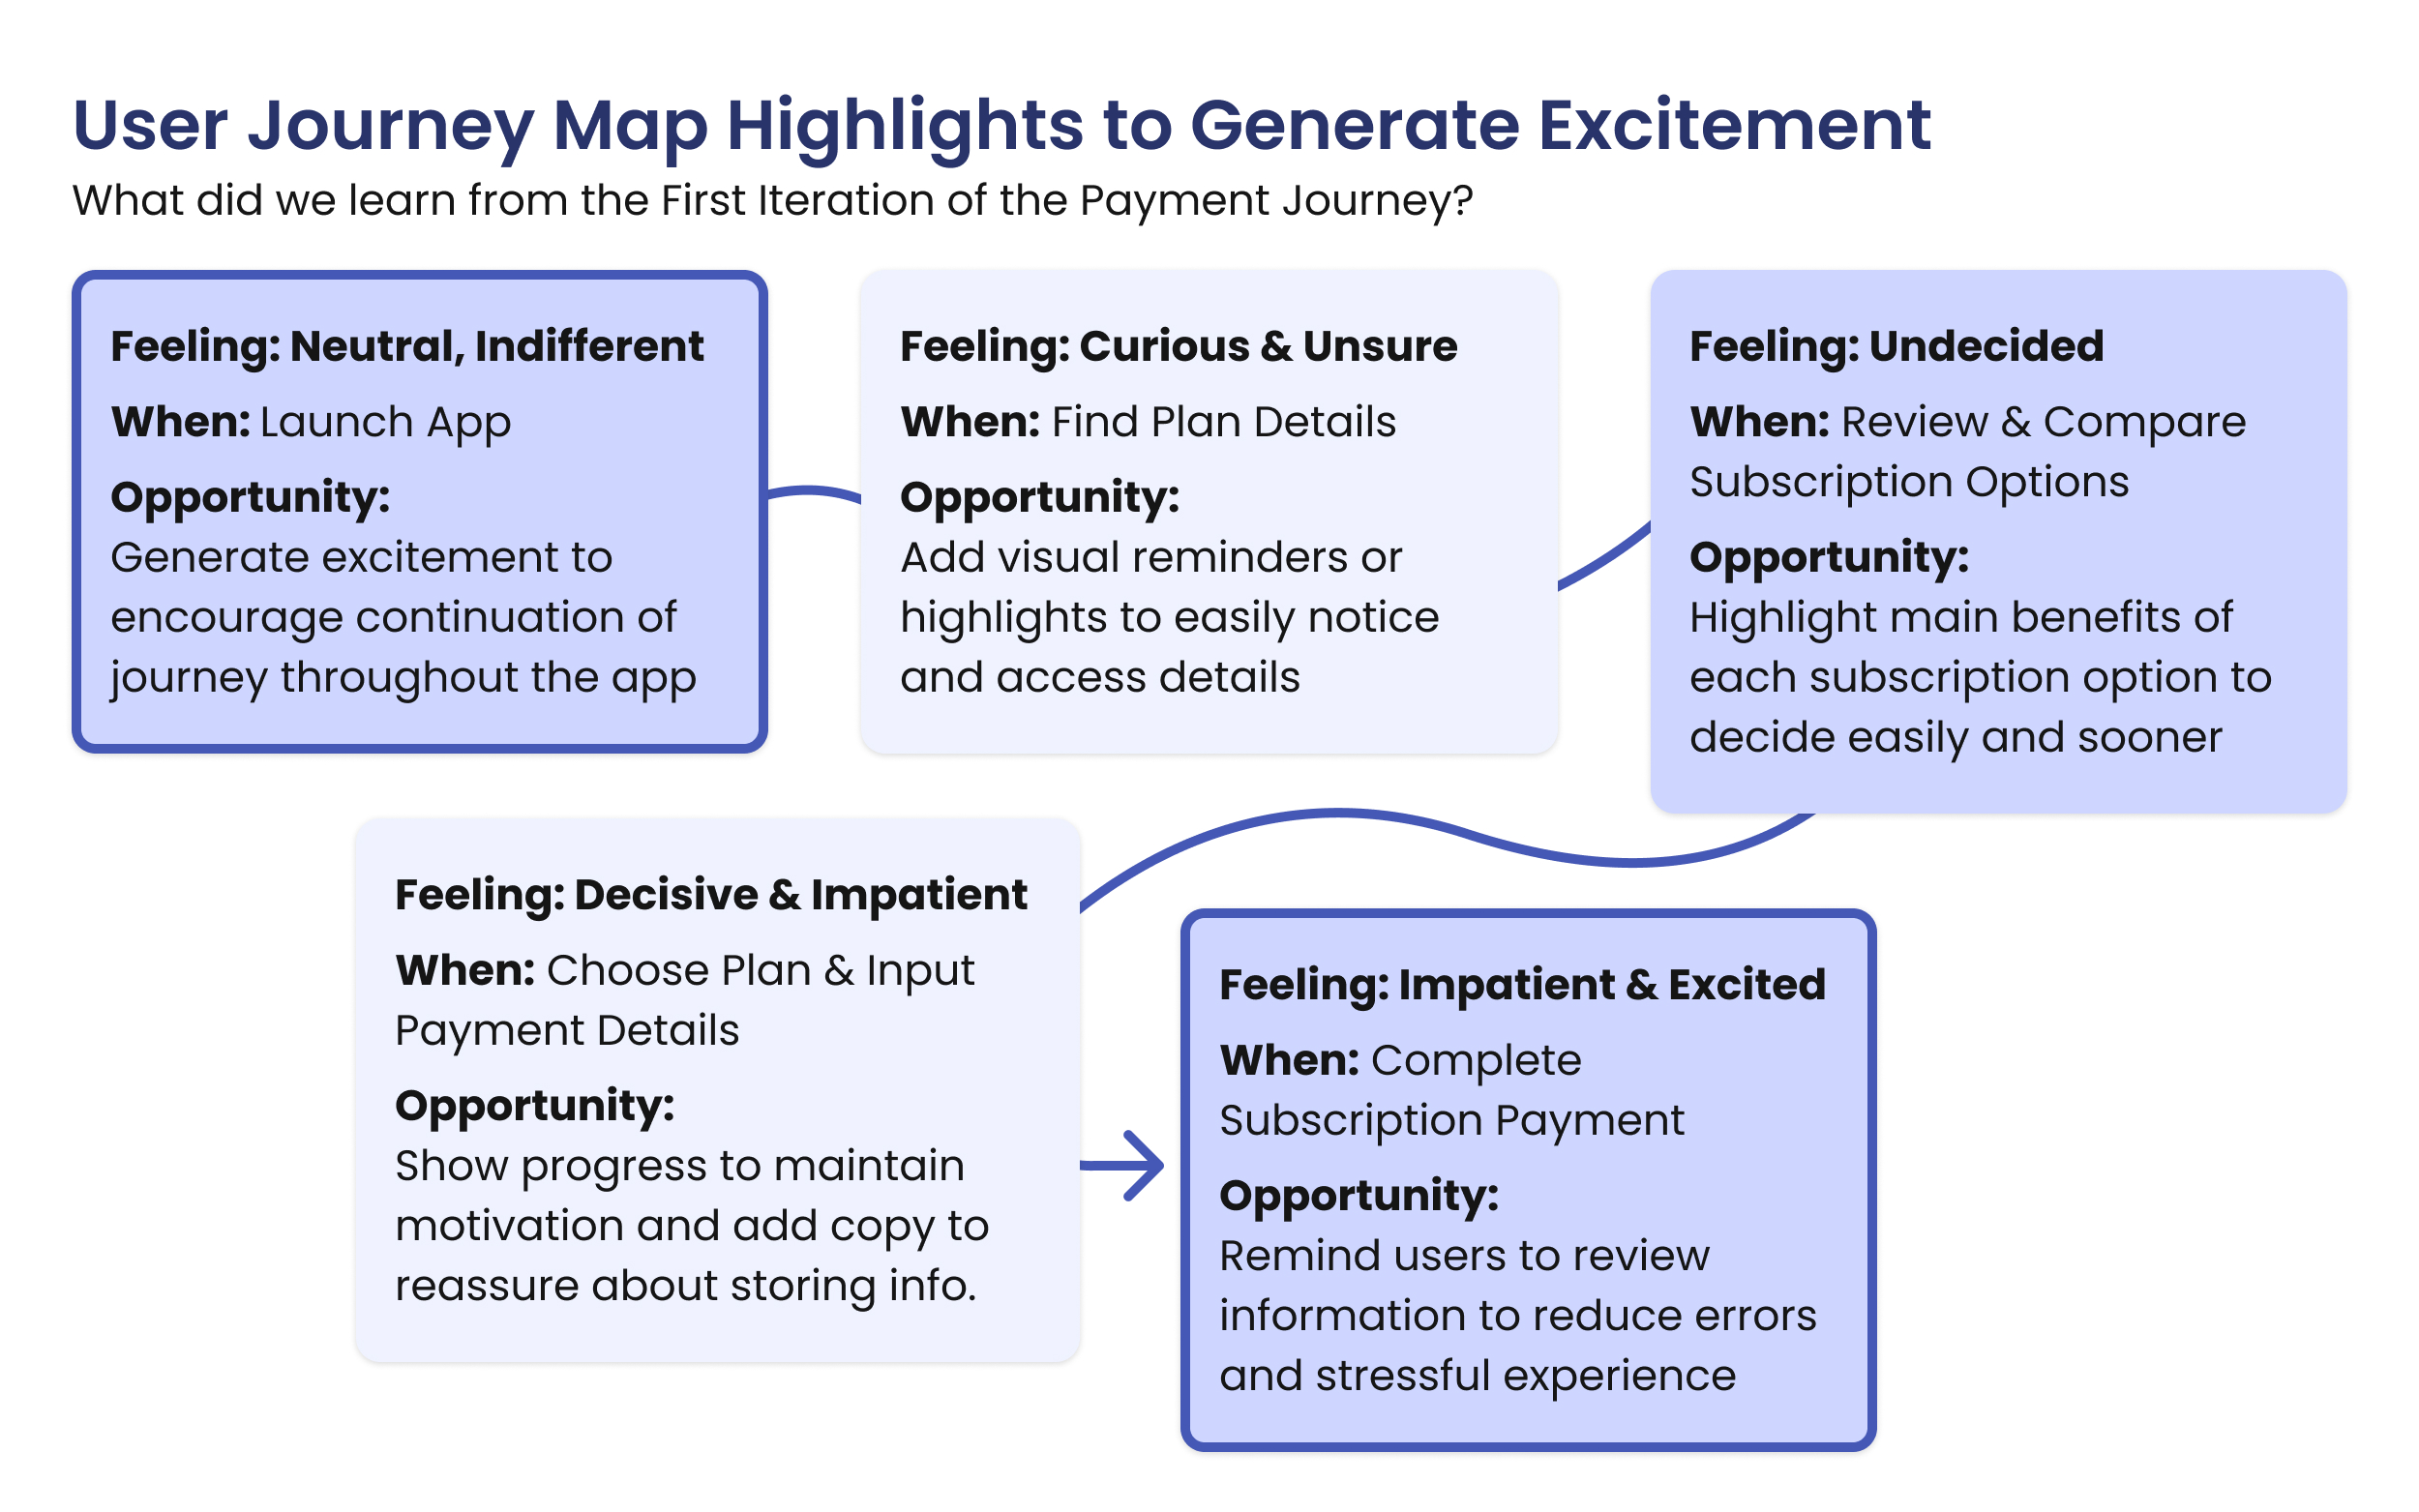 Five groups of text outlining the feelings of the users, when they happened during the user journey, and opportunity areas to consider for the next design iteration